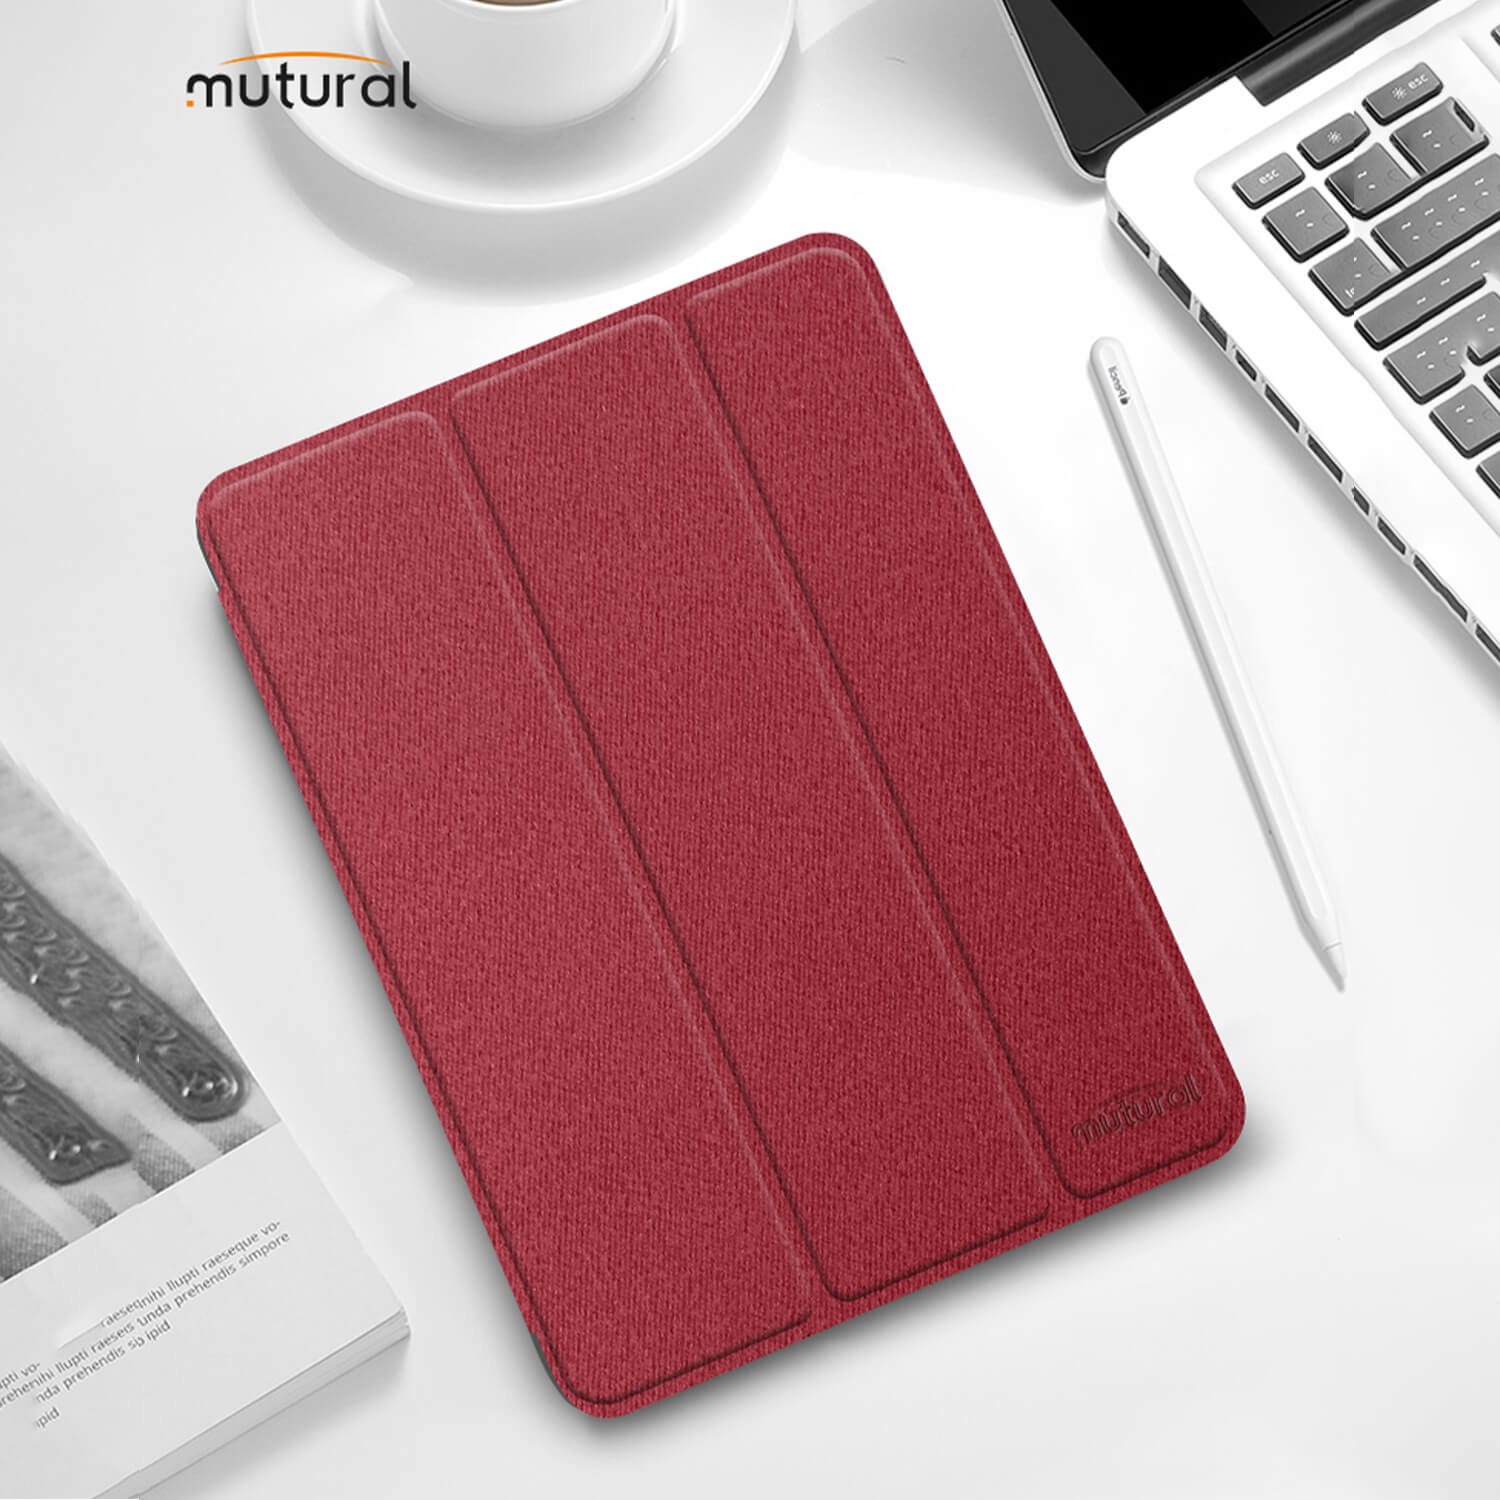 Mutural iPad Pro 2022 / 2021 / 2018 11" Smart Cover Case Red